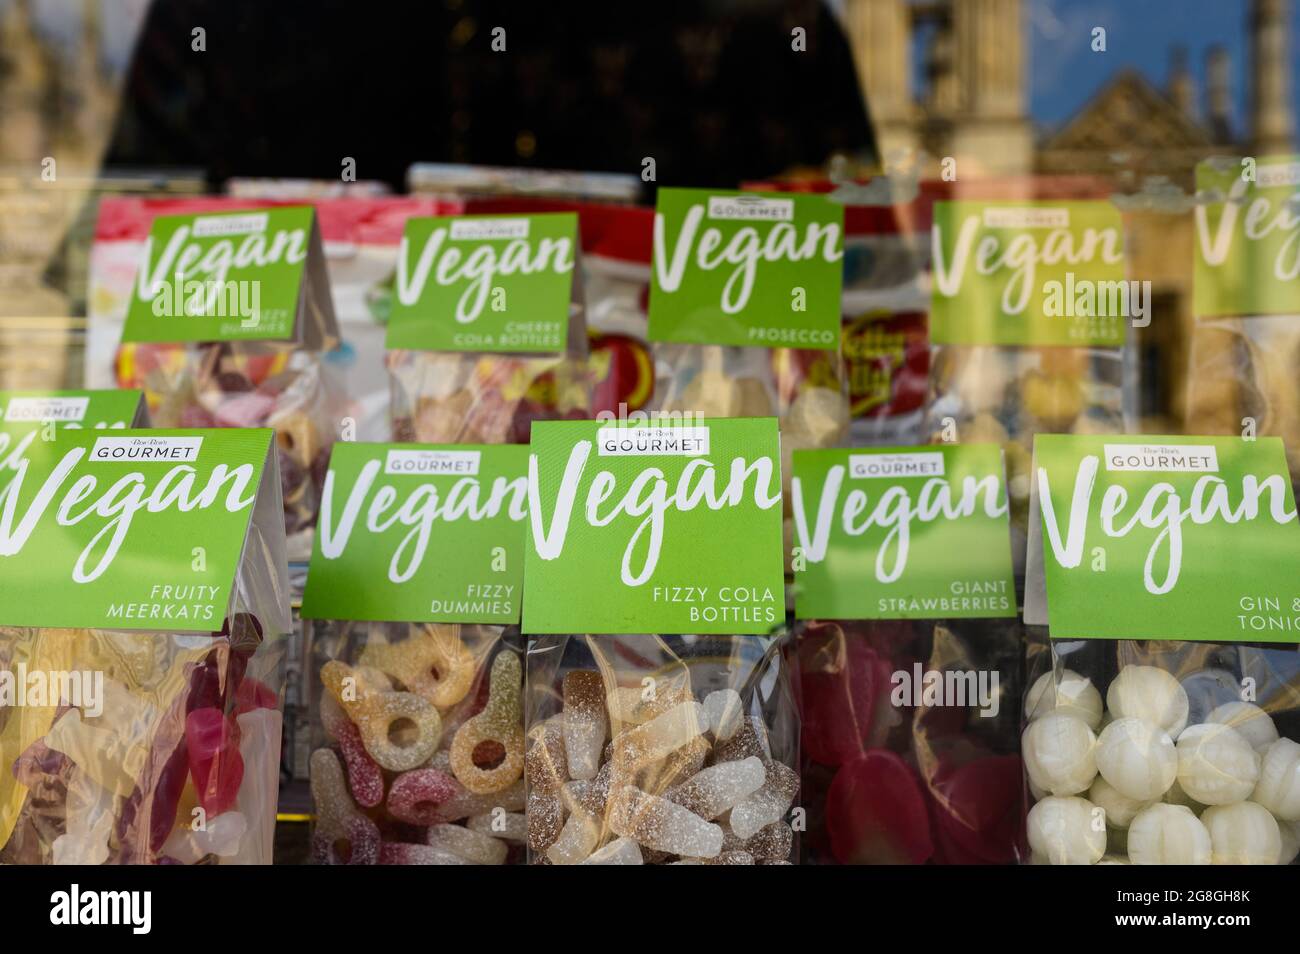 Vegan sweets (candy) on display in a shop window. Stock Photo